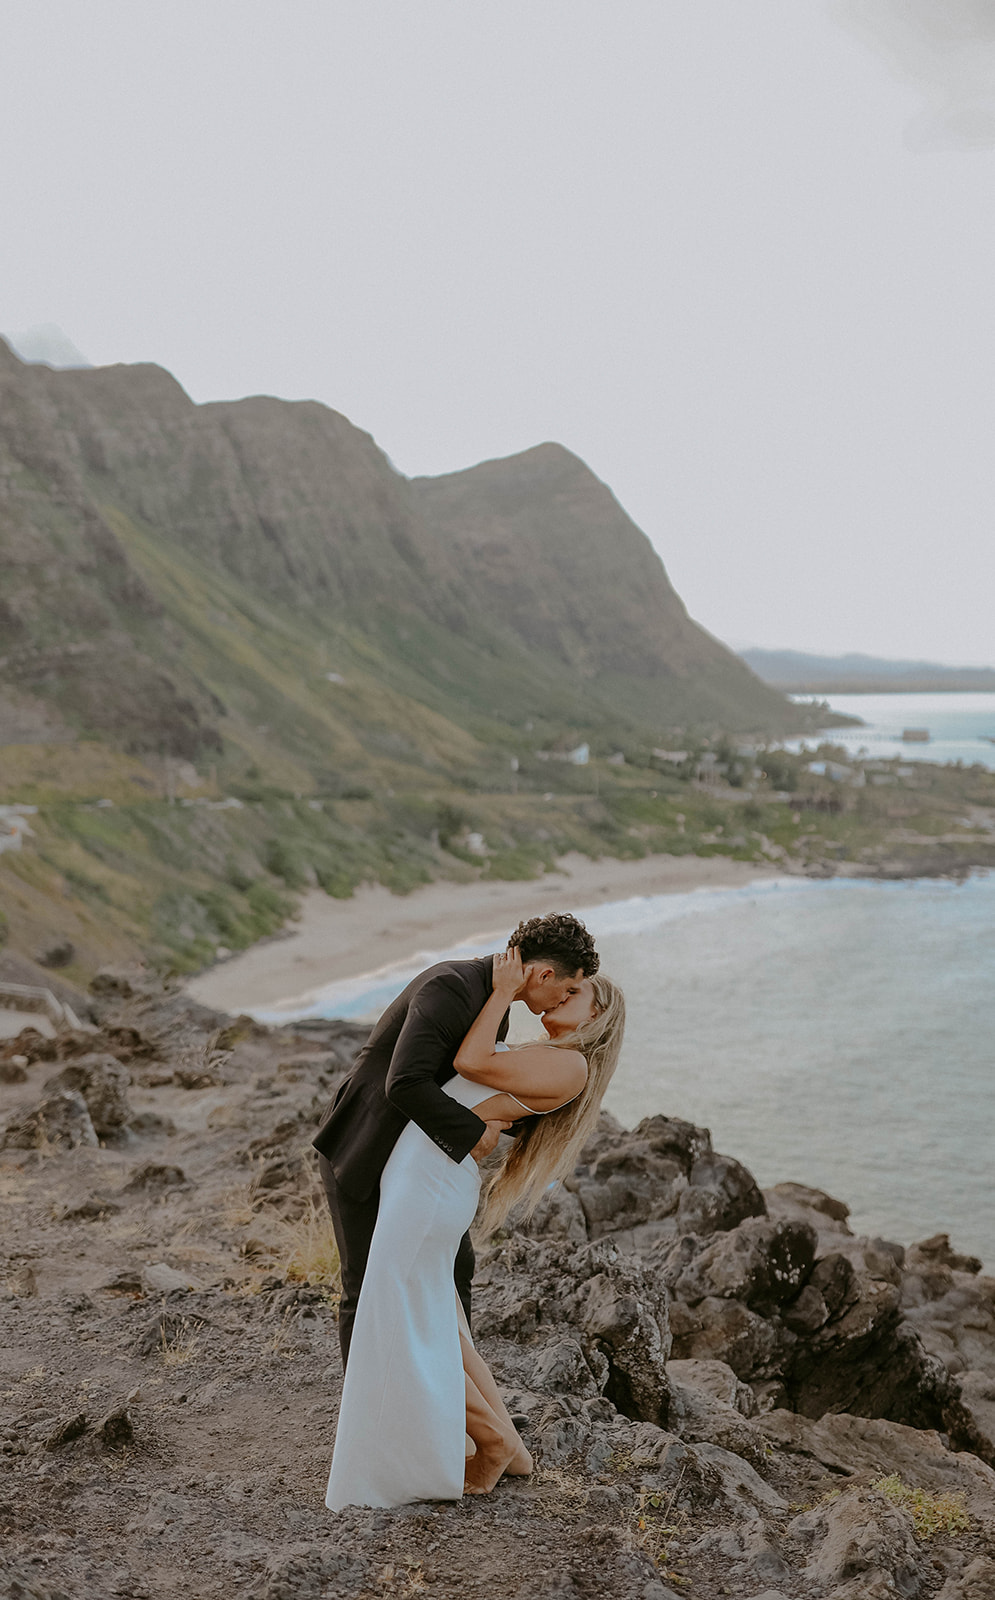 a groom kisses his bride at their elopement ceremony on a cliff overlooking the pacific ocean in oahu hawaii